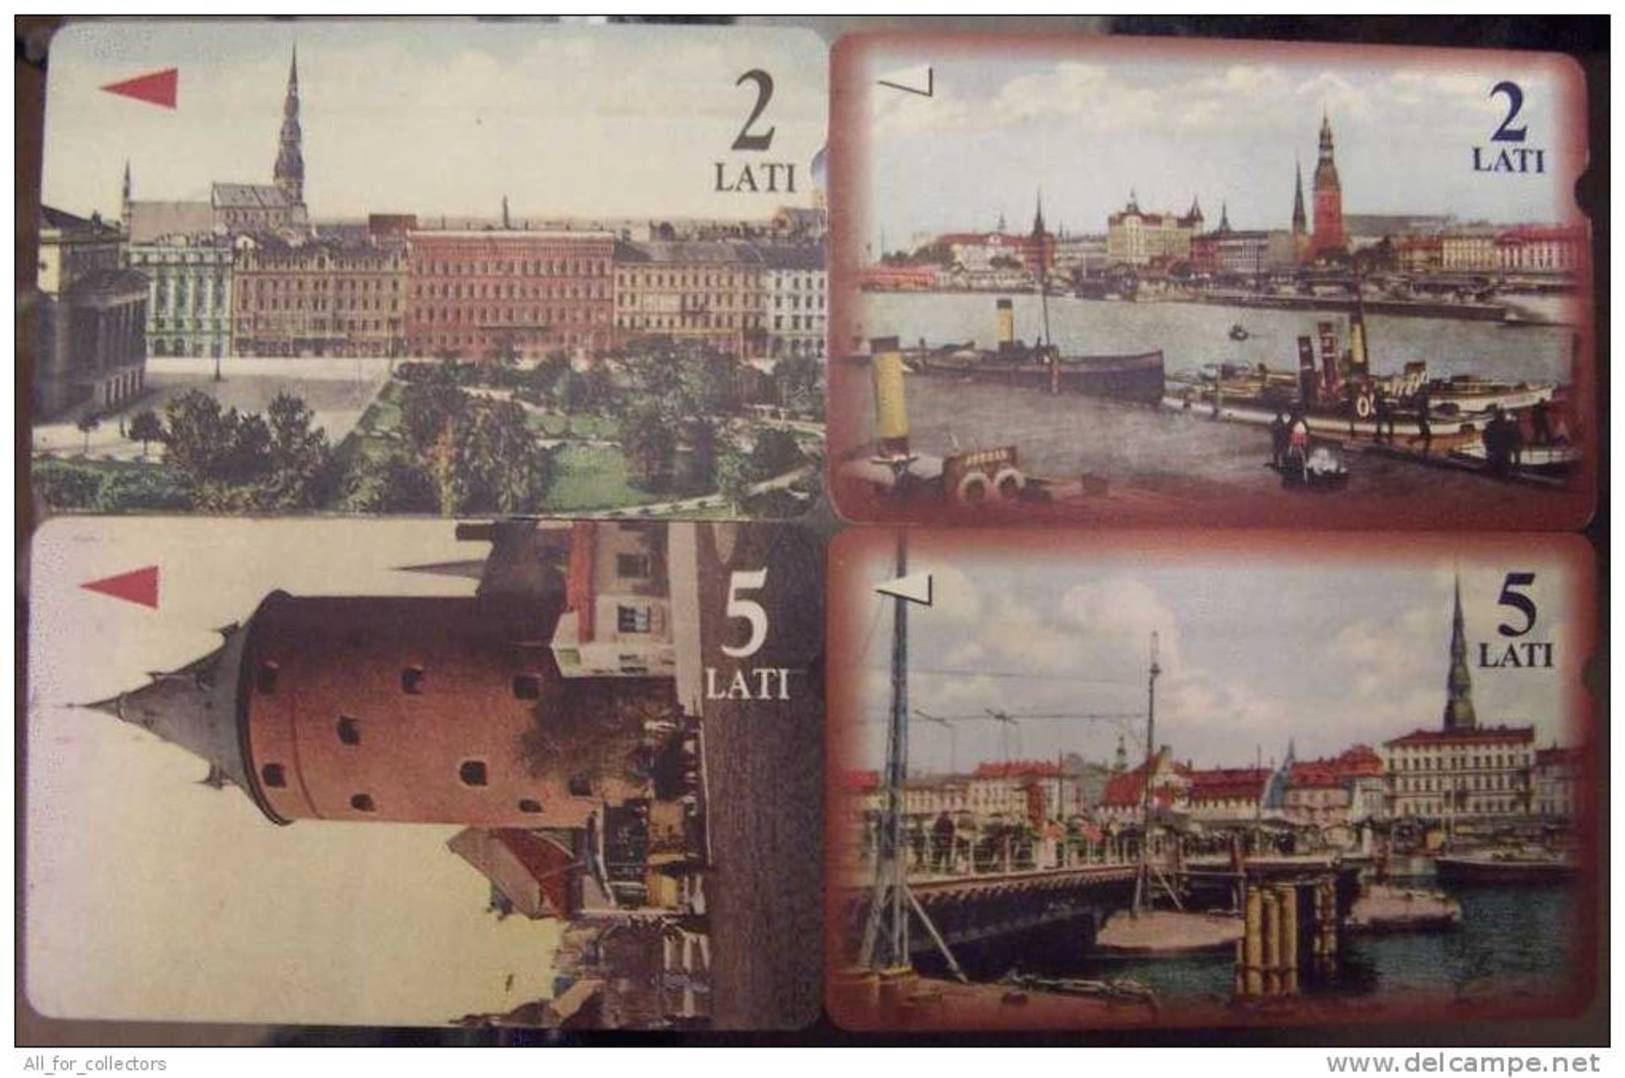 4 Nice Cards Cartes Karten From LATVIA Lettonie Lettland, OLD VIEWS OF RIGA City, Waterfront, Bridge, Square, Tower - Latvia